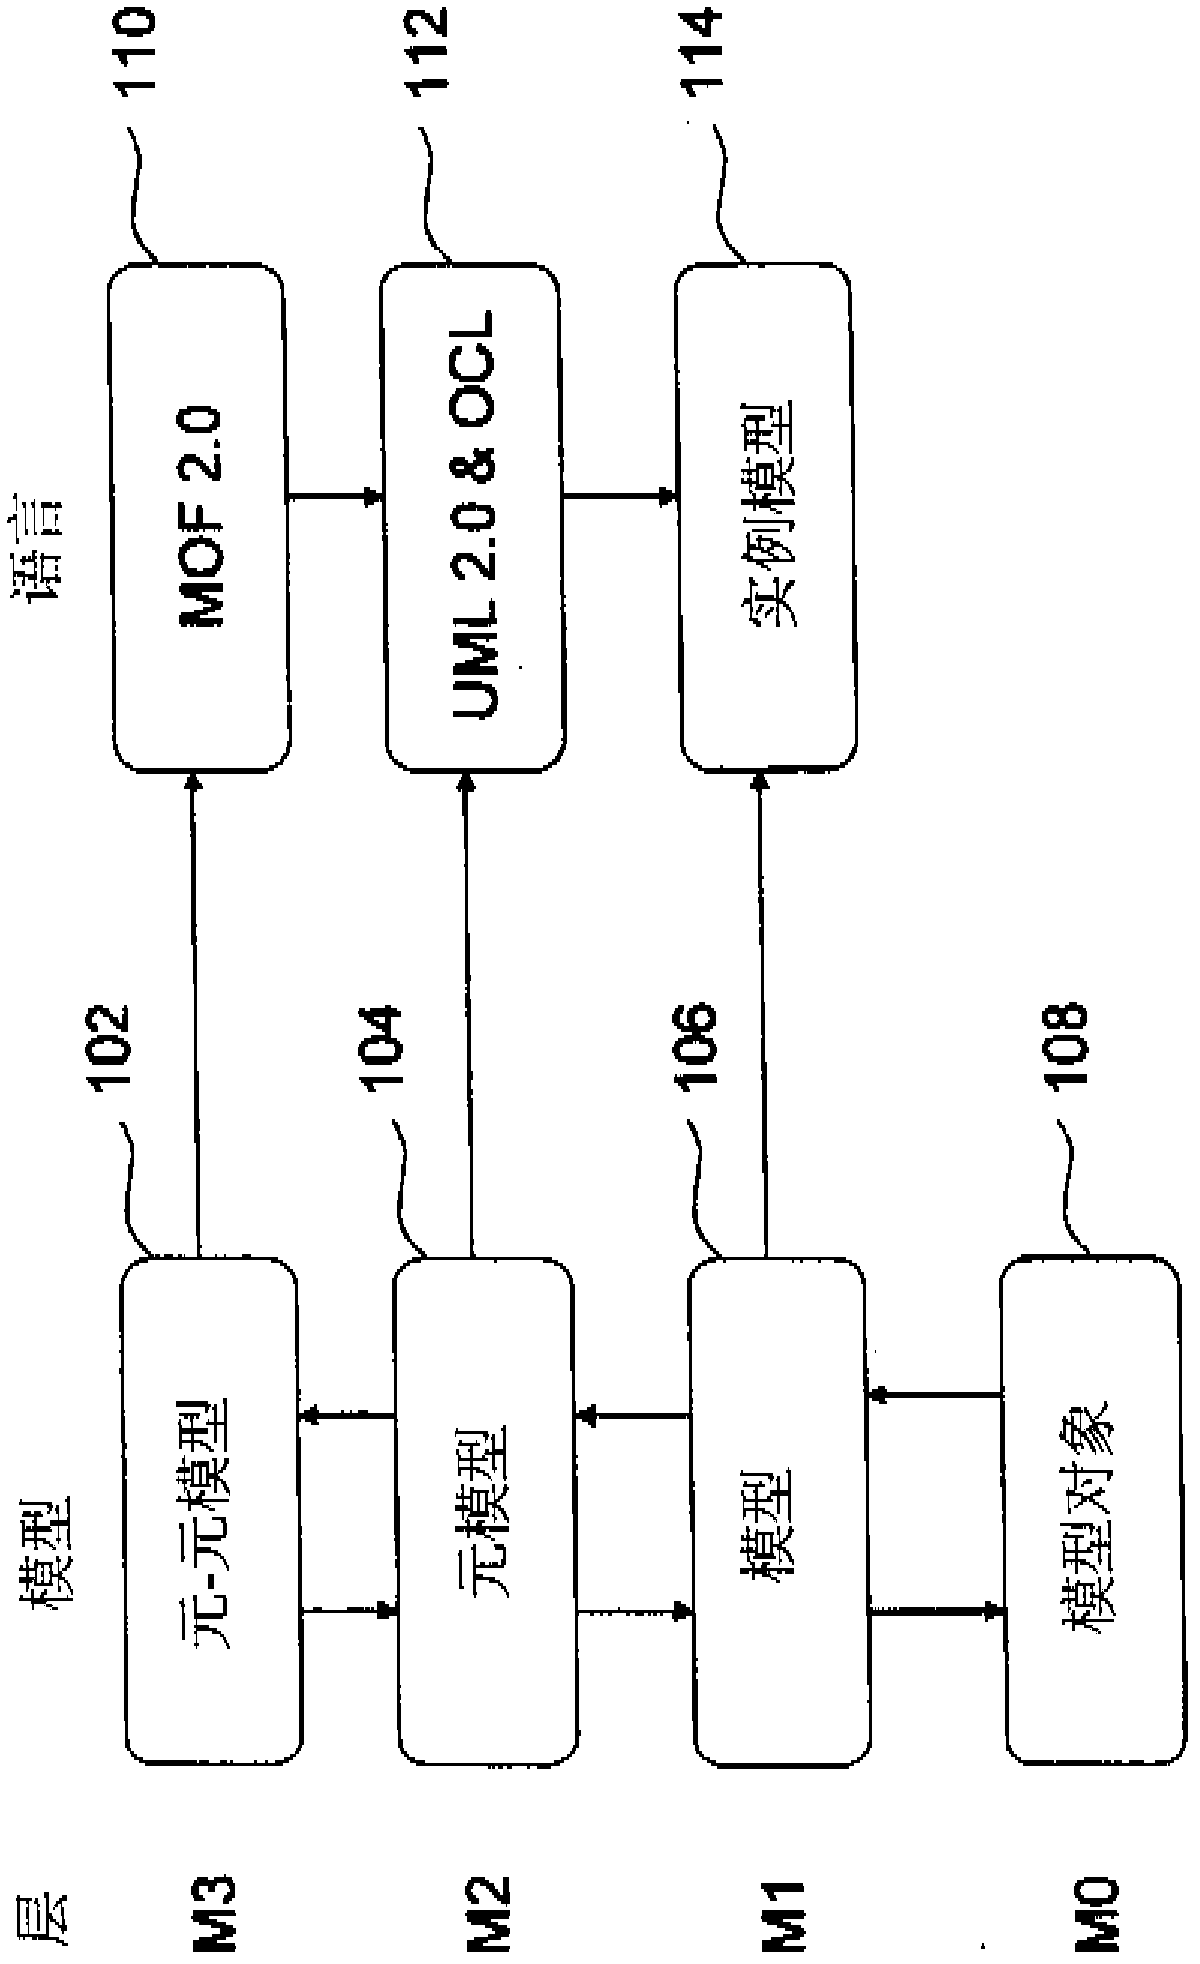 System and/or method for creating meta-model